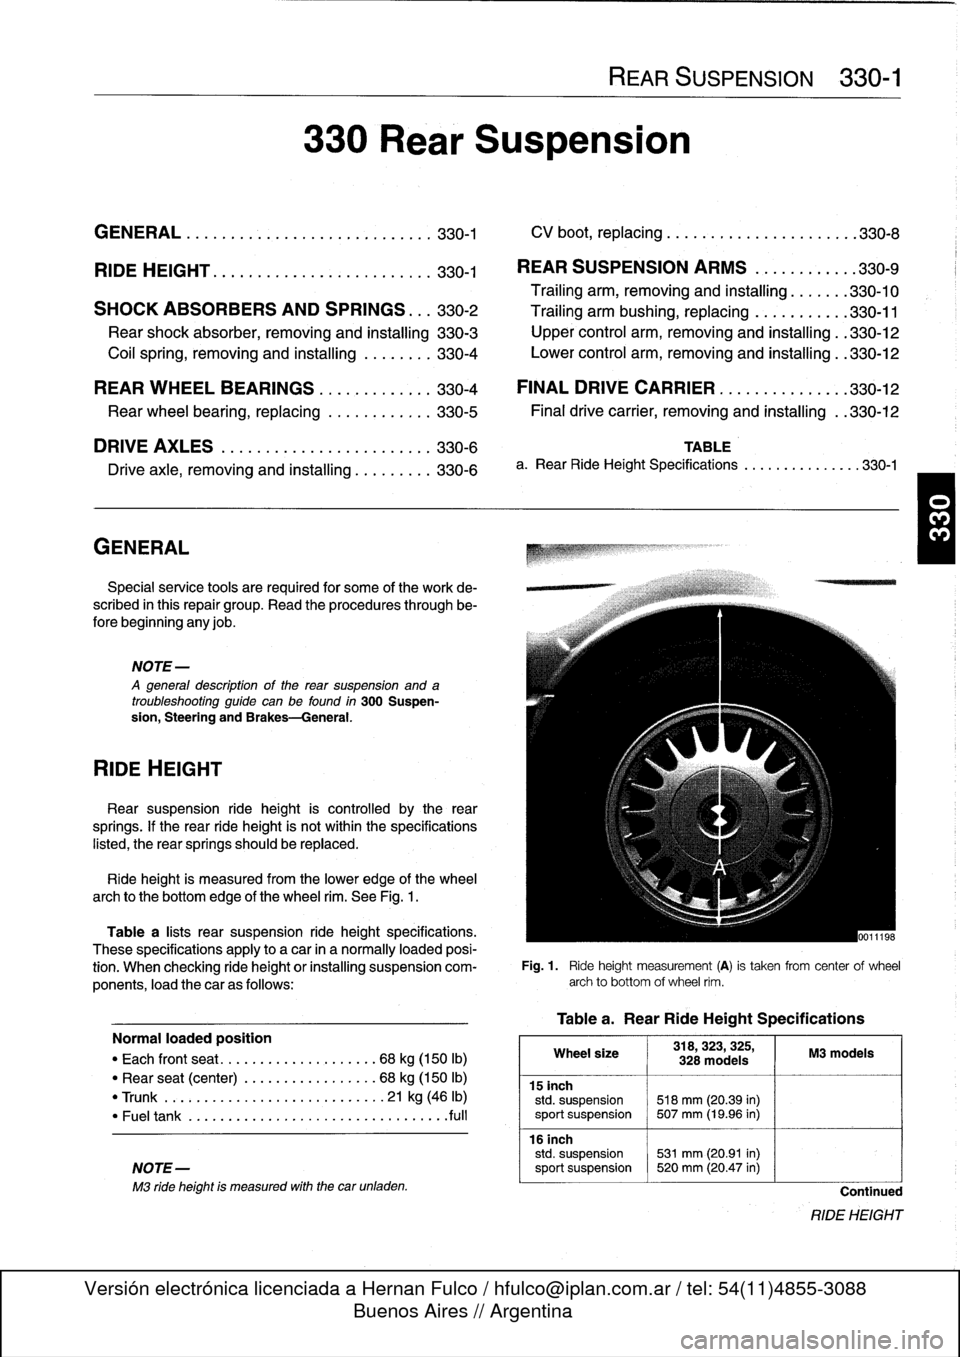 BMW 318i 1997 E36 Workshop Manual 
GENERAL
.......
.
.
.
.
.
.
.
.
.
.......
.
...
.330-1

	

CV
boot,
replacing
........
.
.
.
.........
.
.330-8

RIDE
HEIGHT
....
.
.
.
.
.
...
.
...
.
.
.
.
.
...
.
330-1

	

REAR
SUSPENSION
ARMS
.
